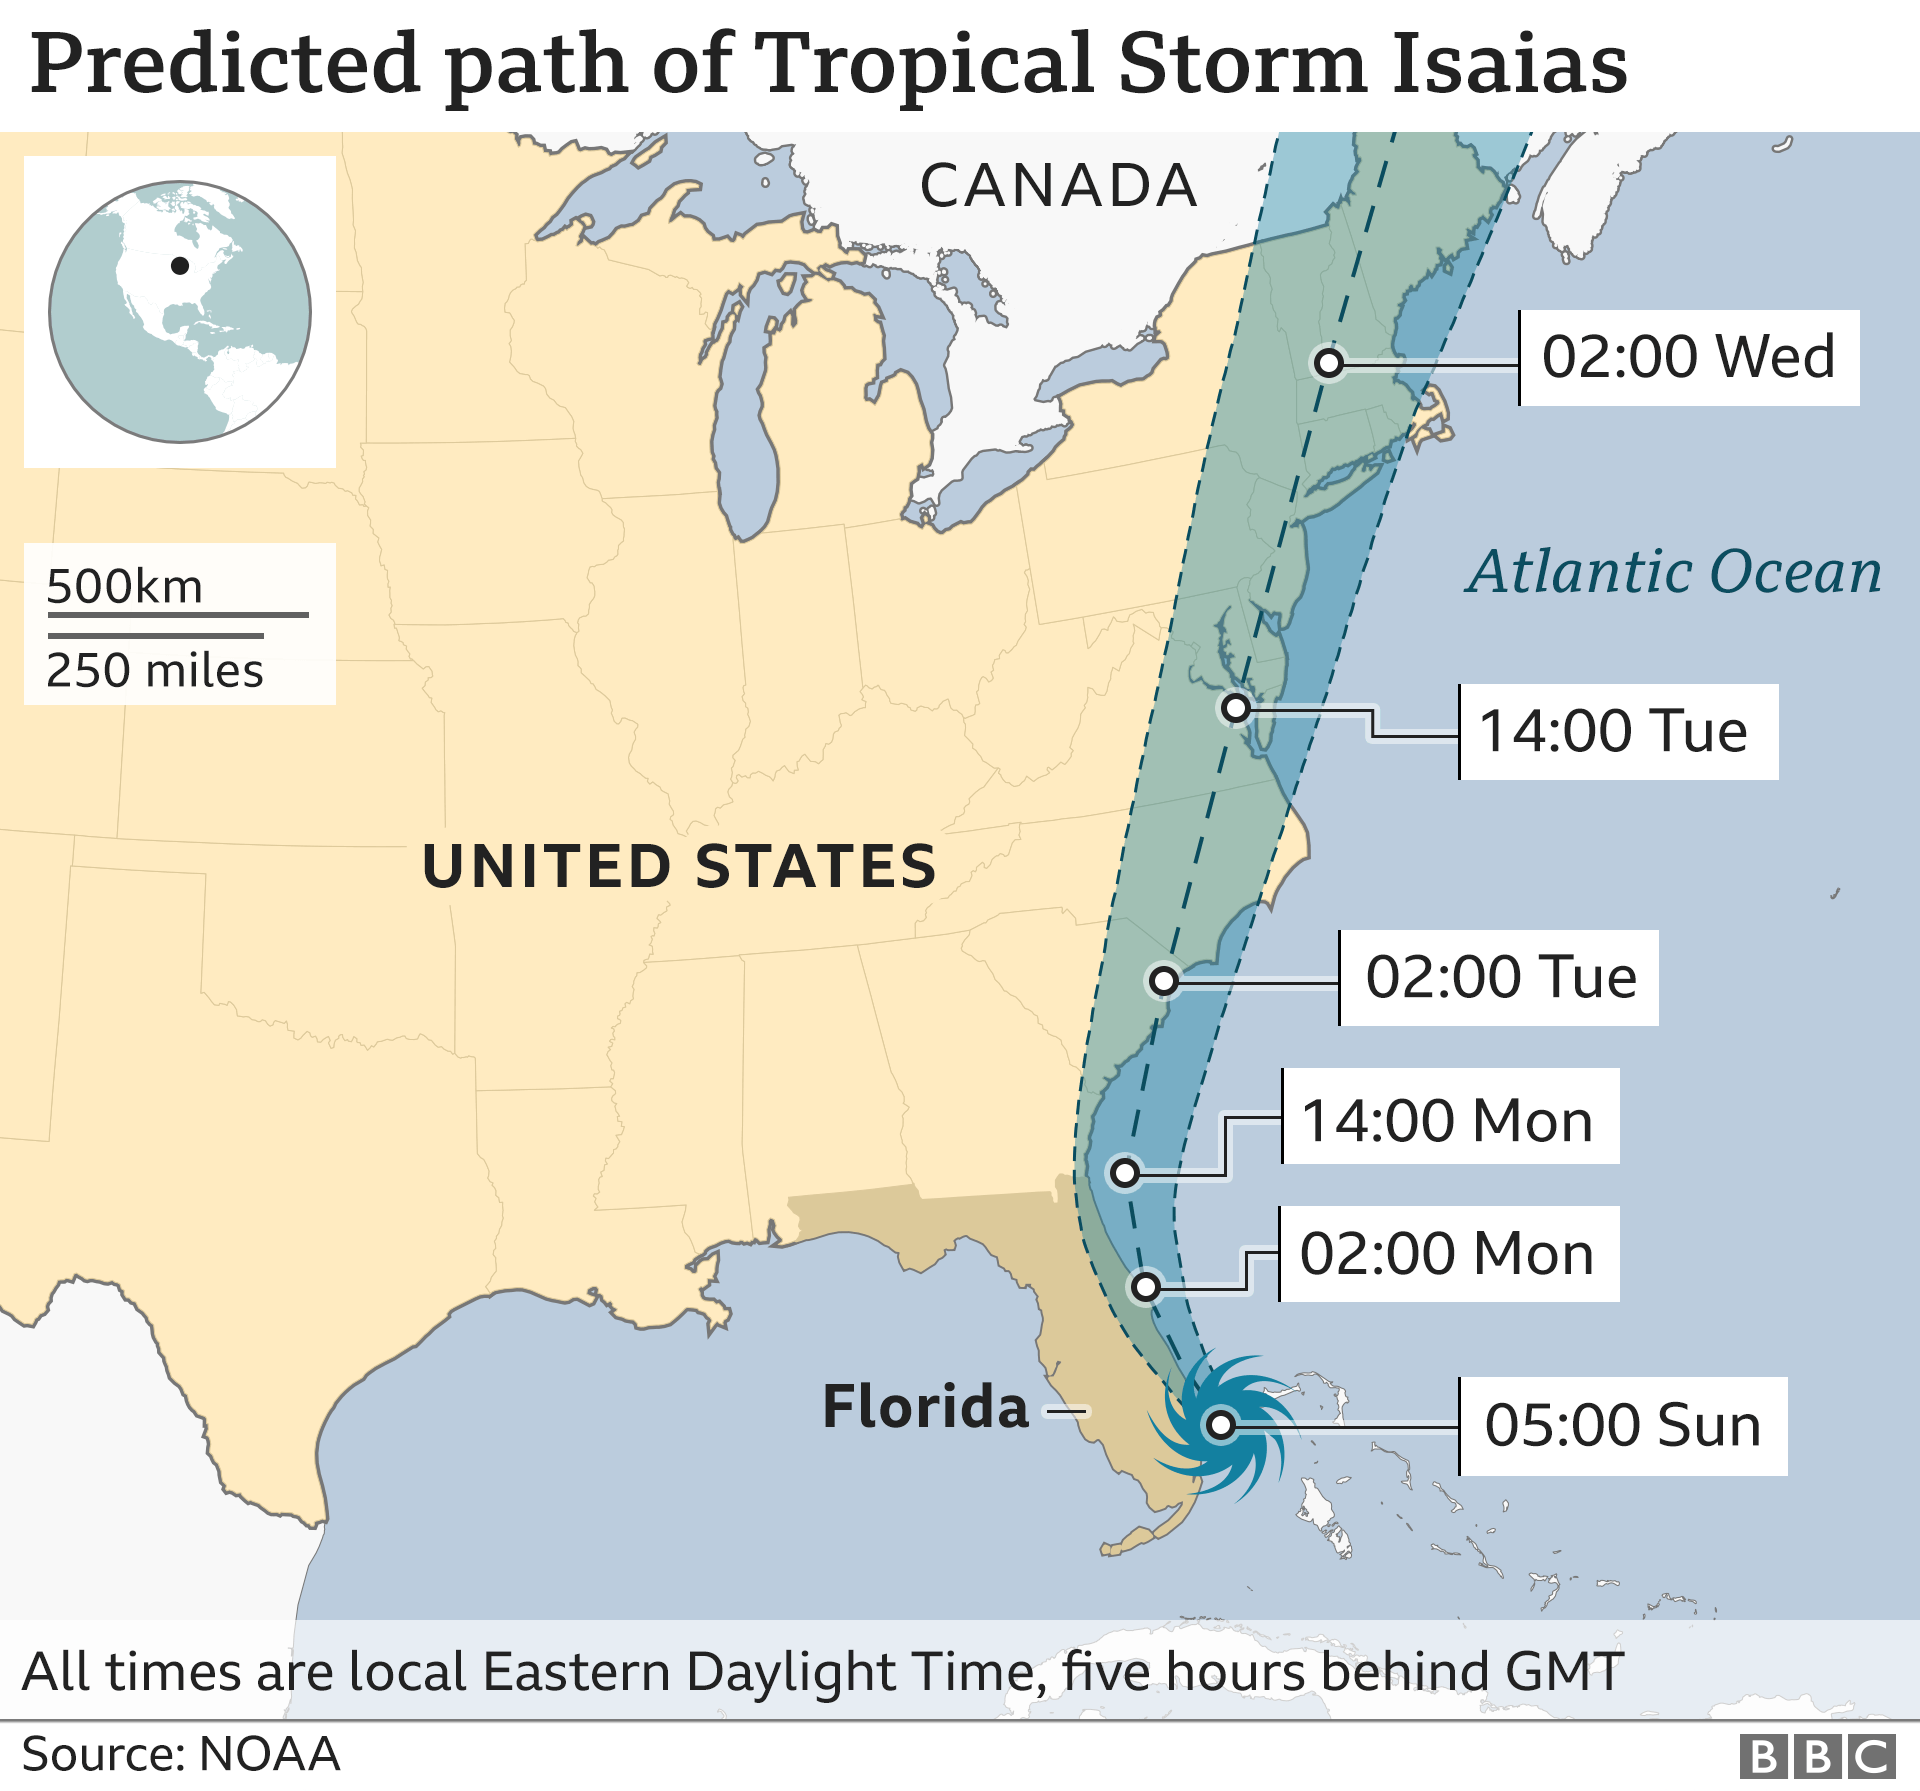 Graphic showing the predicted path of Tropical Storm Isaias as of 07:00 EDT, Sunday 2 August